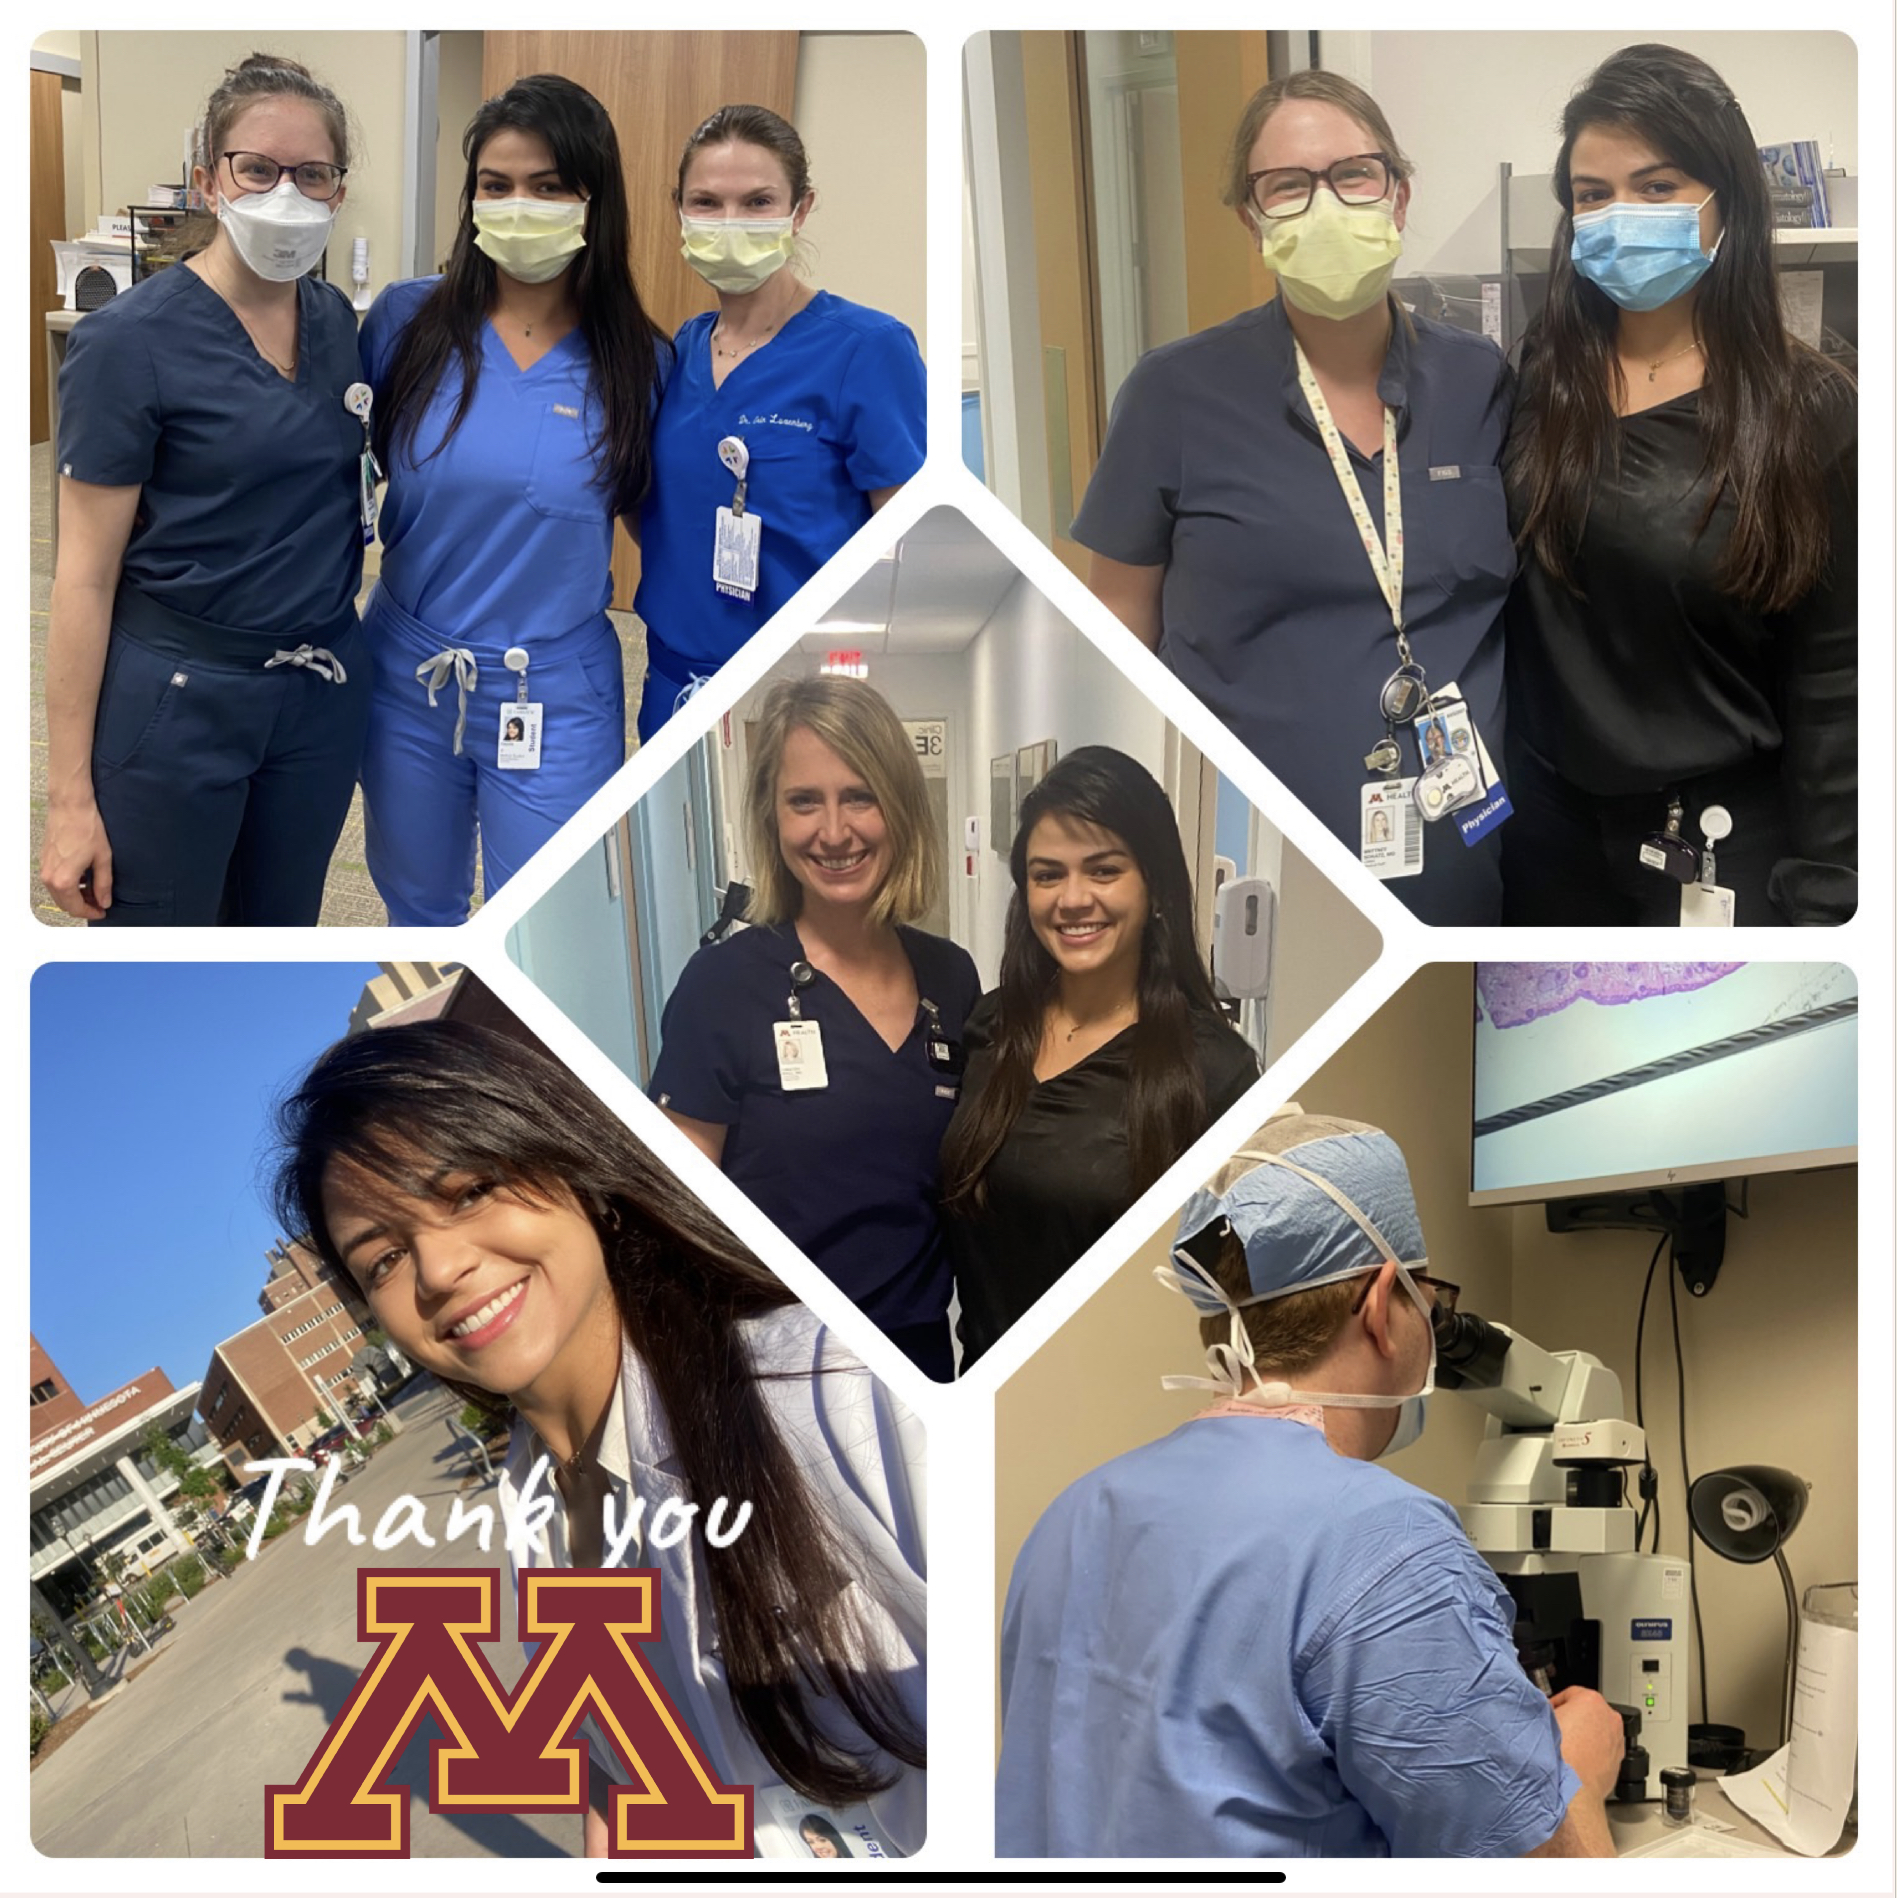 Collage of photos with Camilla Jaramillo smiling in front of the University of Minnesota Medical School and with her faculty mentors. 